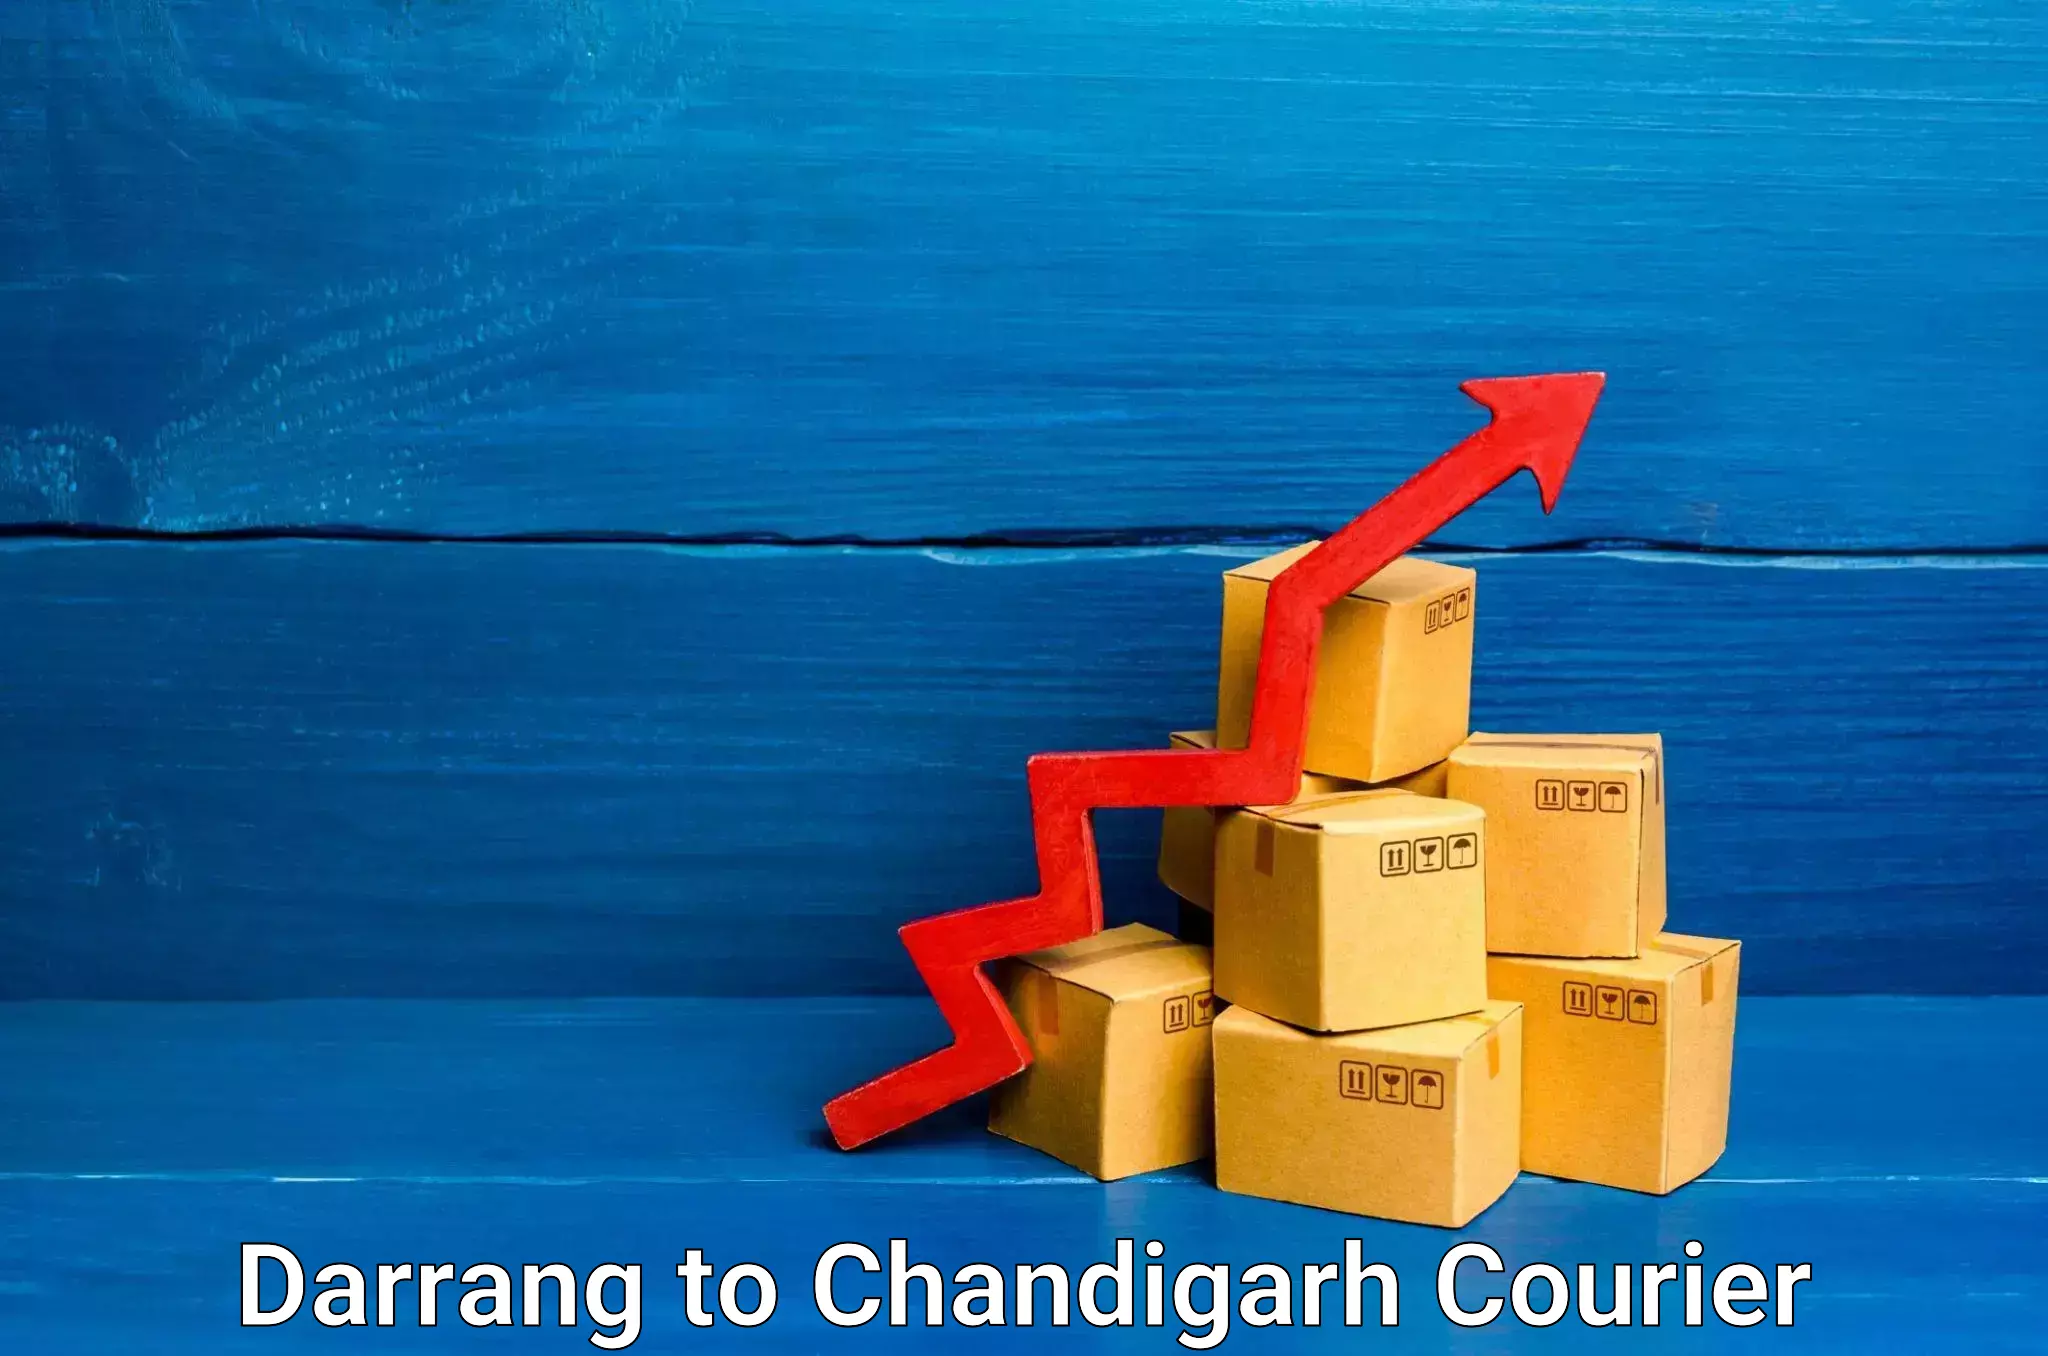 Overnight delivery services Darrang to Chandigarh